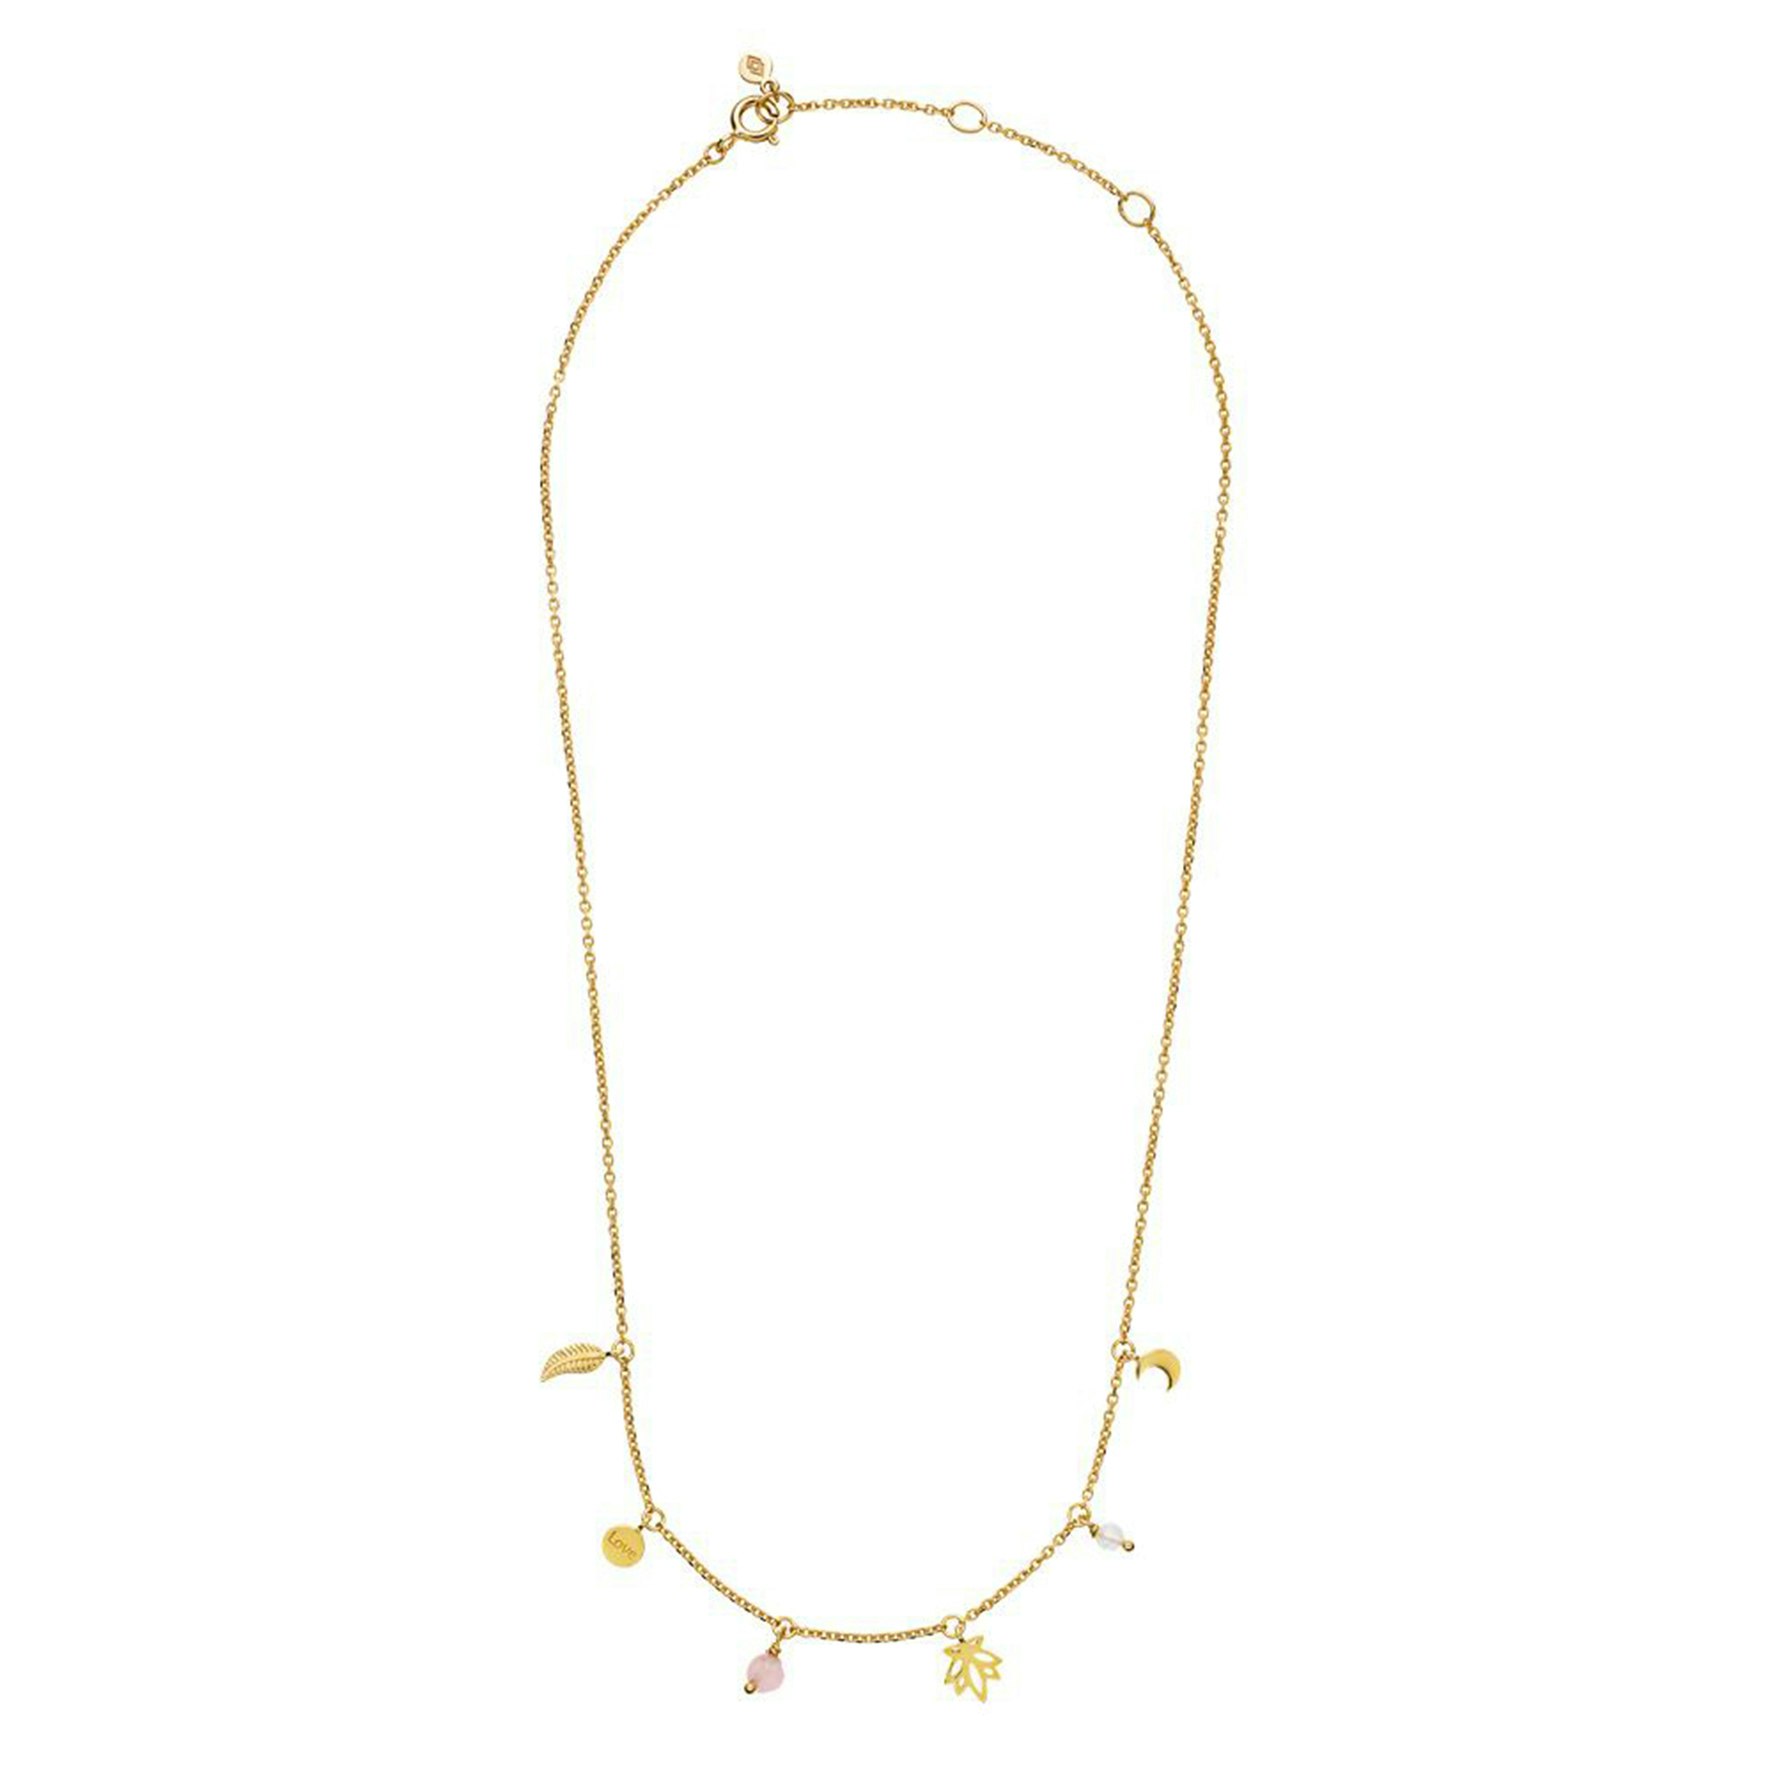 Mie Moltke Necklace from Izabel Camille in Goldplated Silver Sterling 925